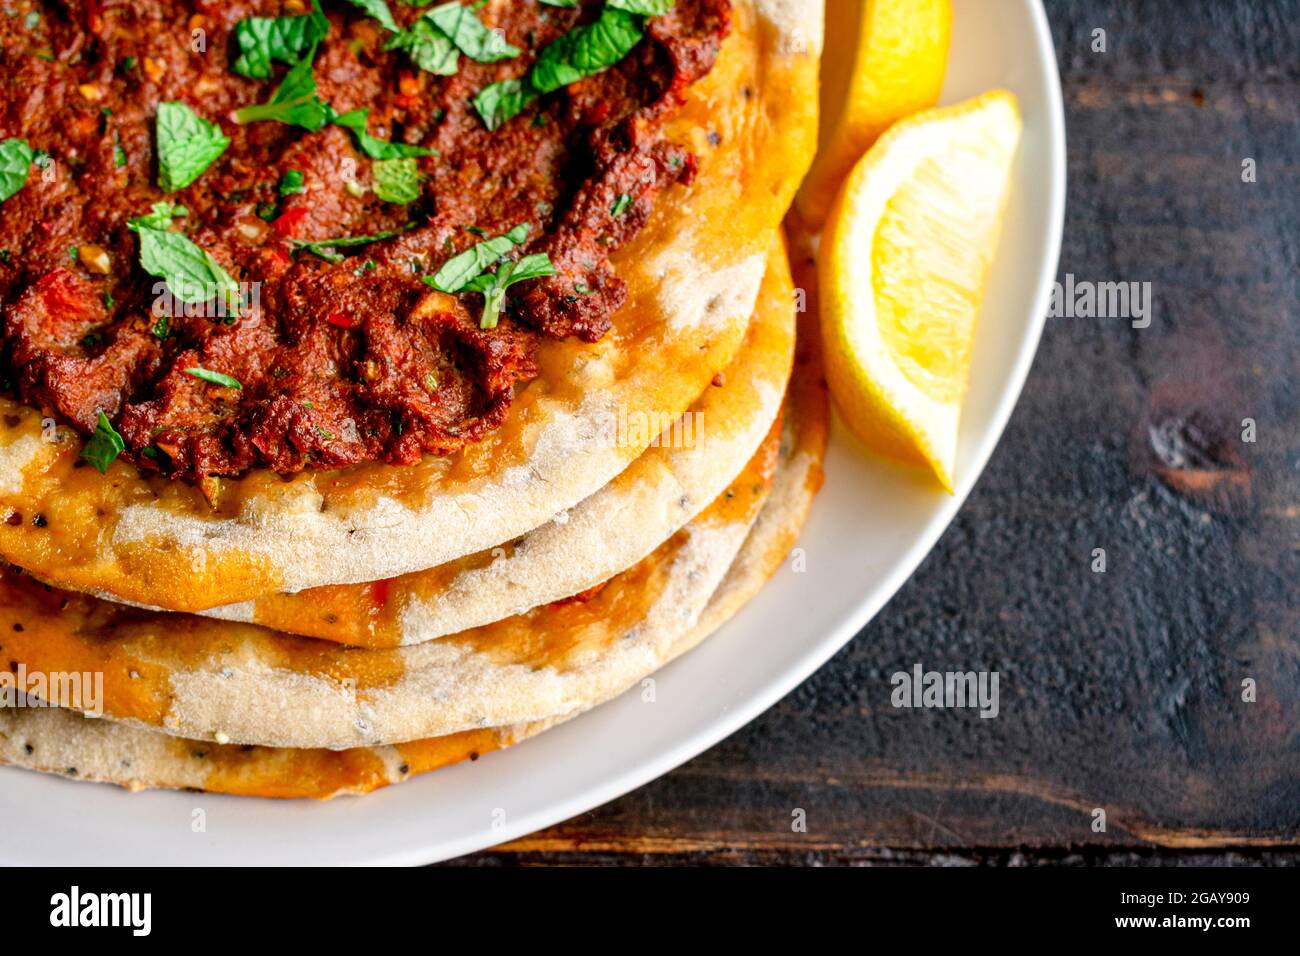 Closeup View of Turkish Lahmacun Served with Lemon Wedges: Turkish flatbreads topped with spiced ground meat and garnished with chopped mint leaves Stock Photo